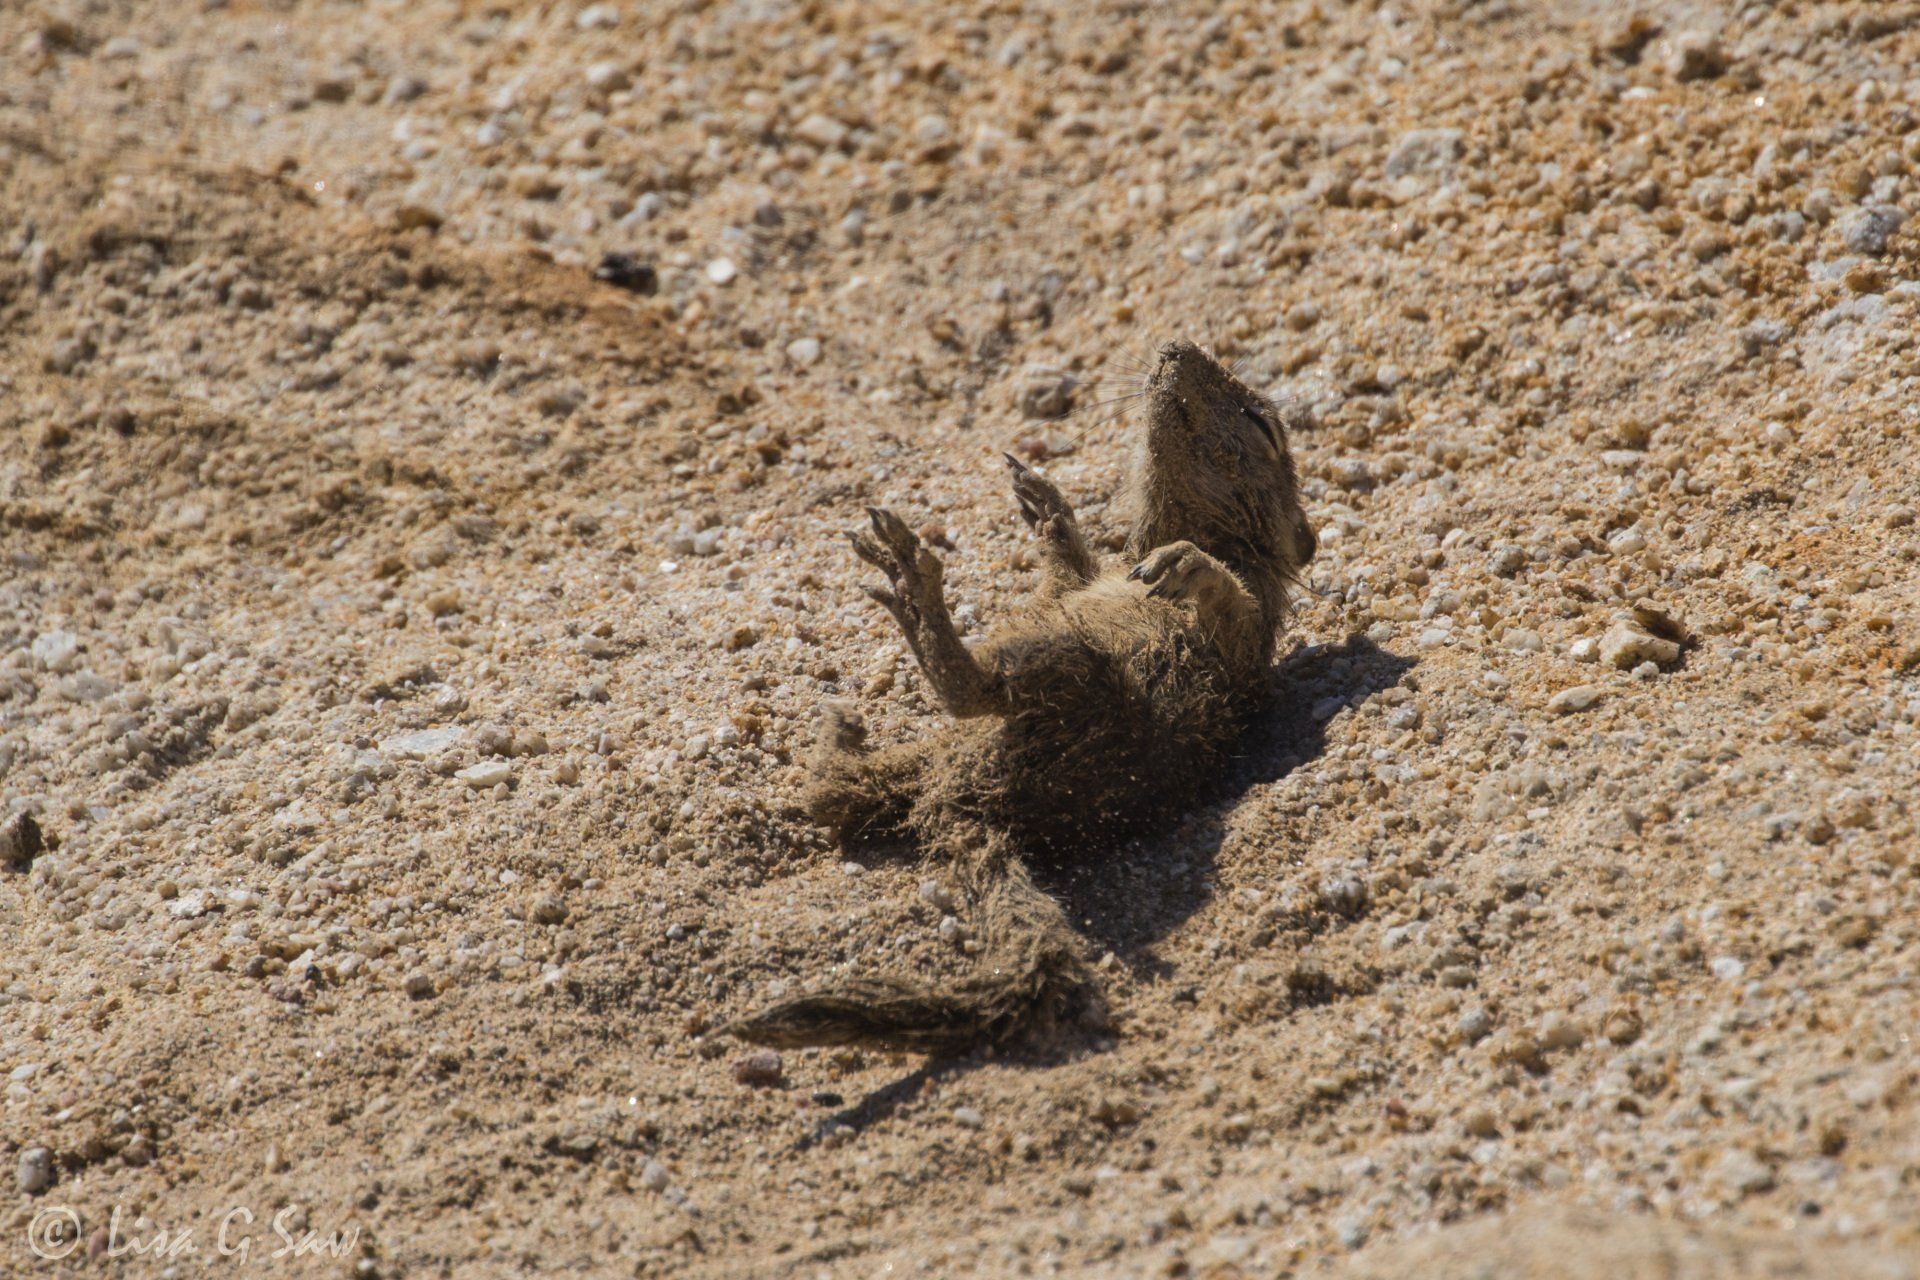 Young ground squirrel rolling around in sand